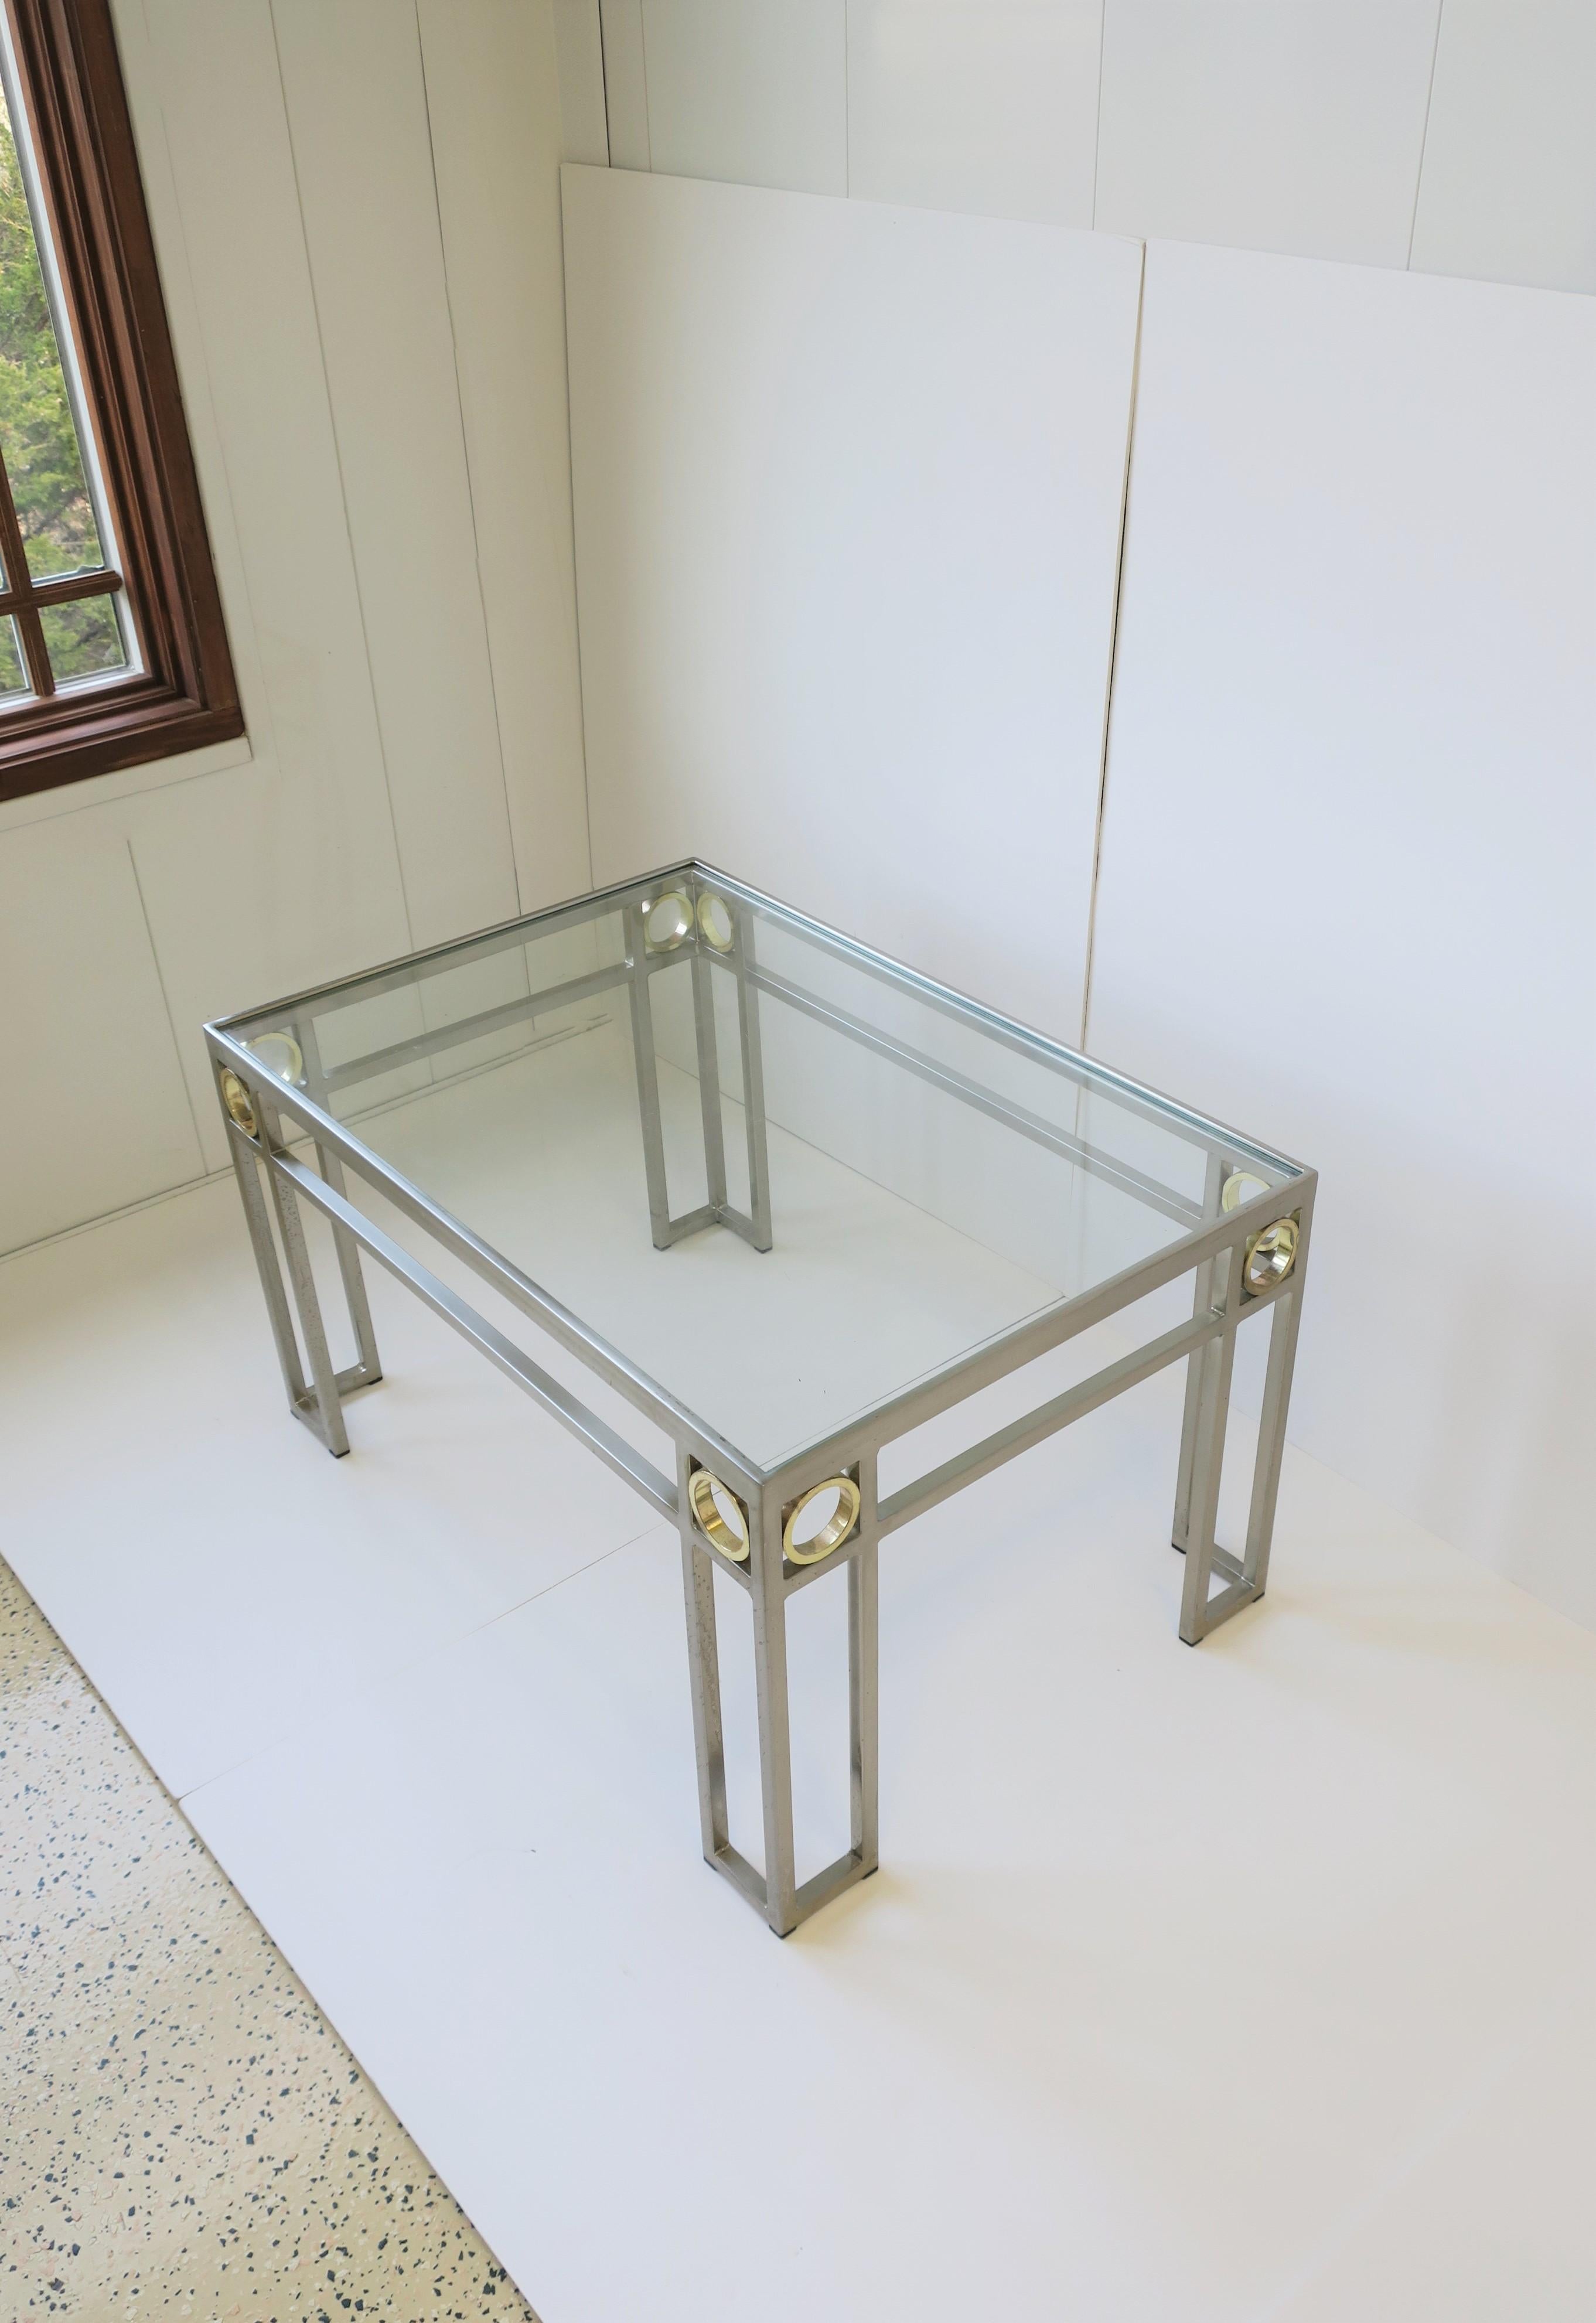 A beautiful and substantial Art Deco coffee or cocktail table. Table is rectangular with an inset glass top, steel frame, and gold colored geometric accents, circa 1990s.

Table measures: 31